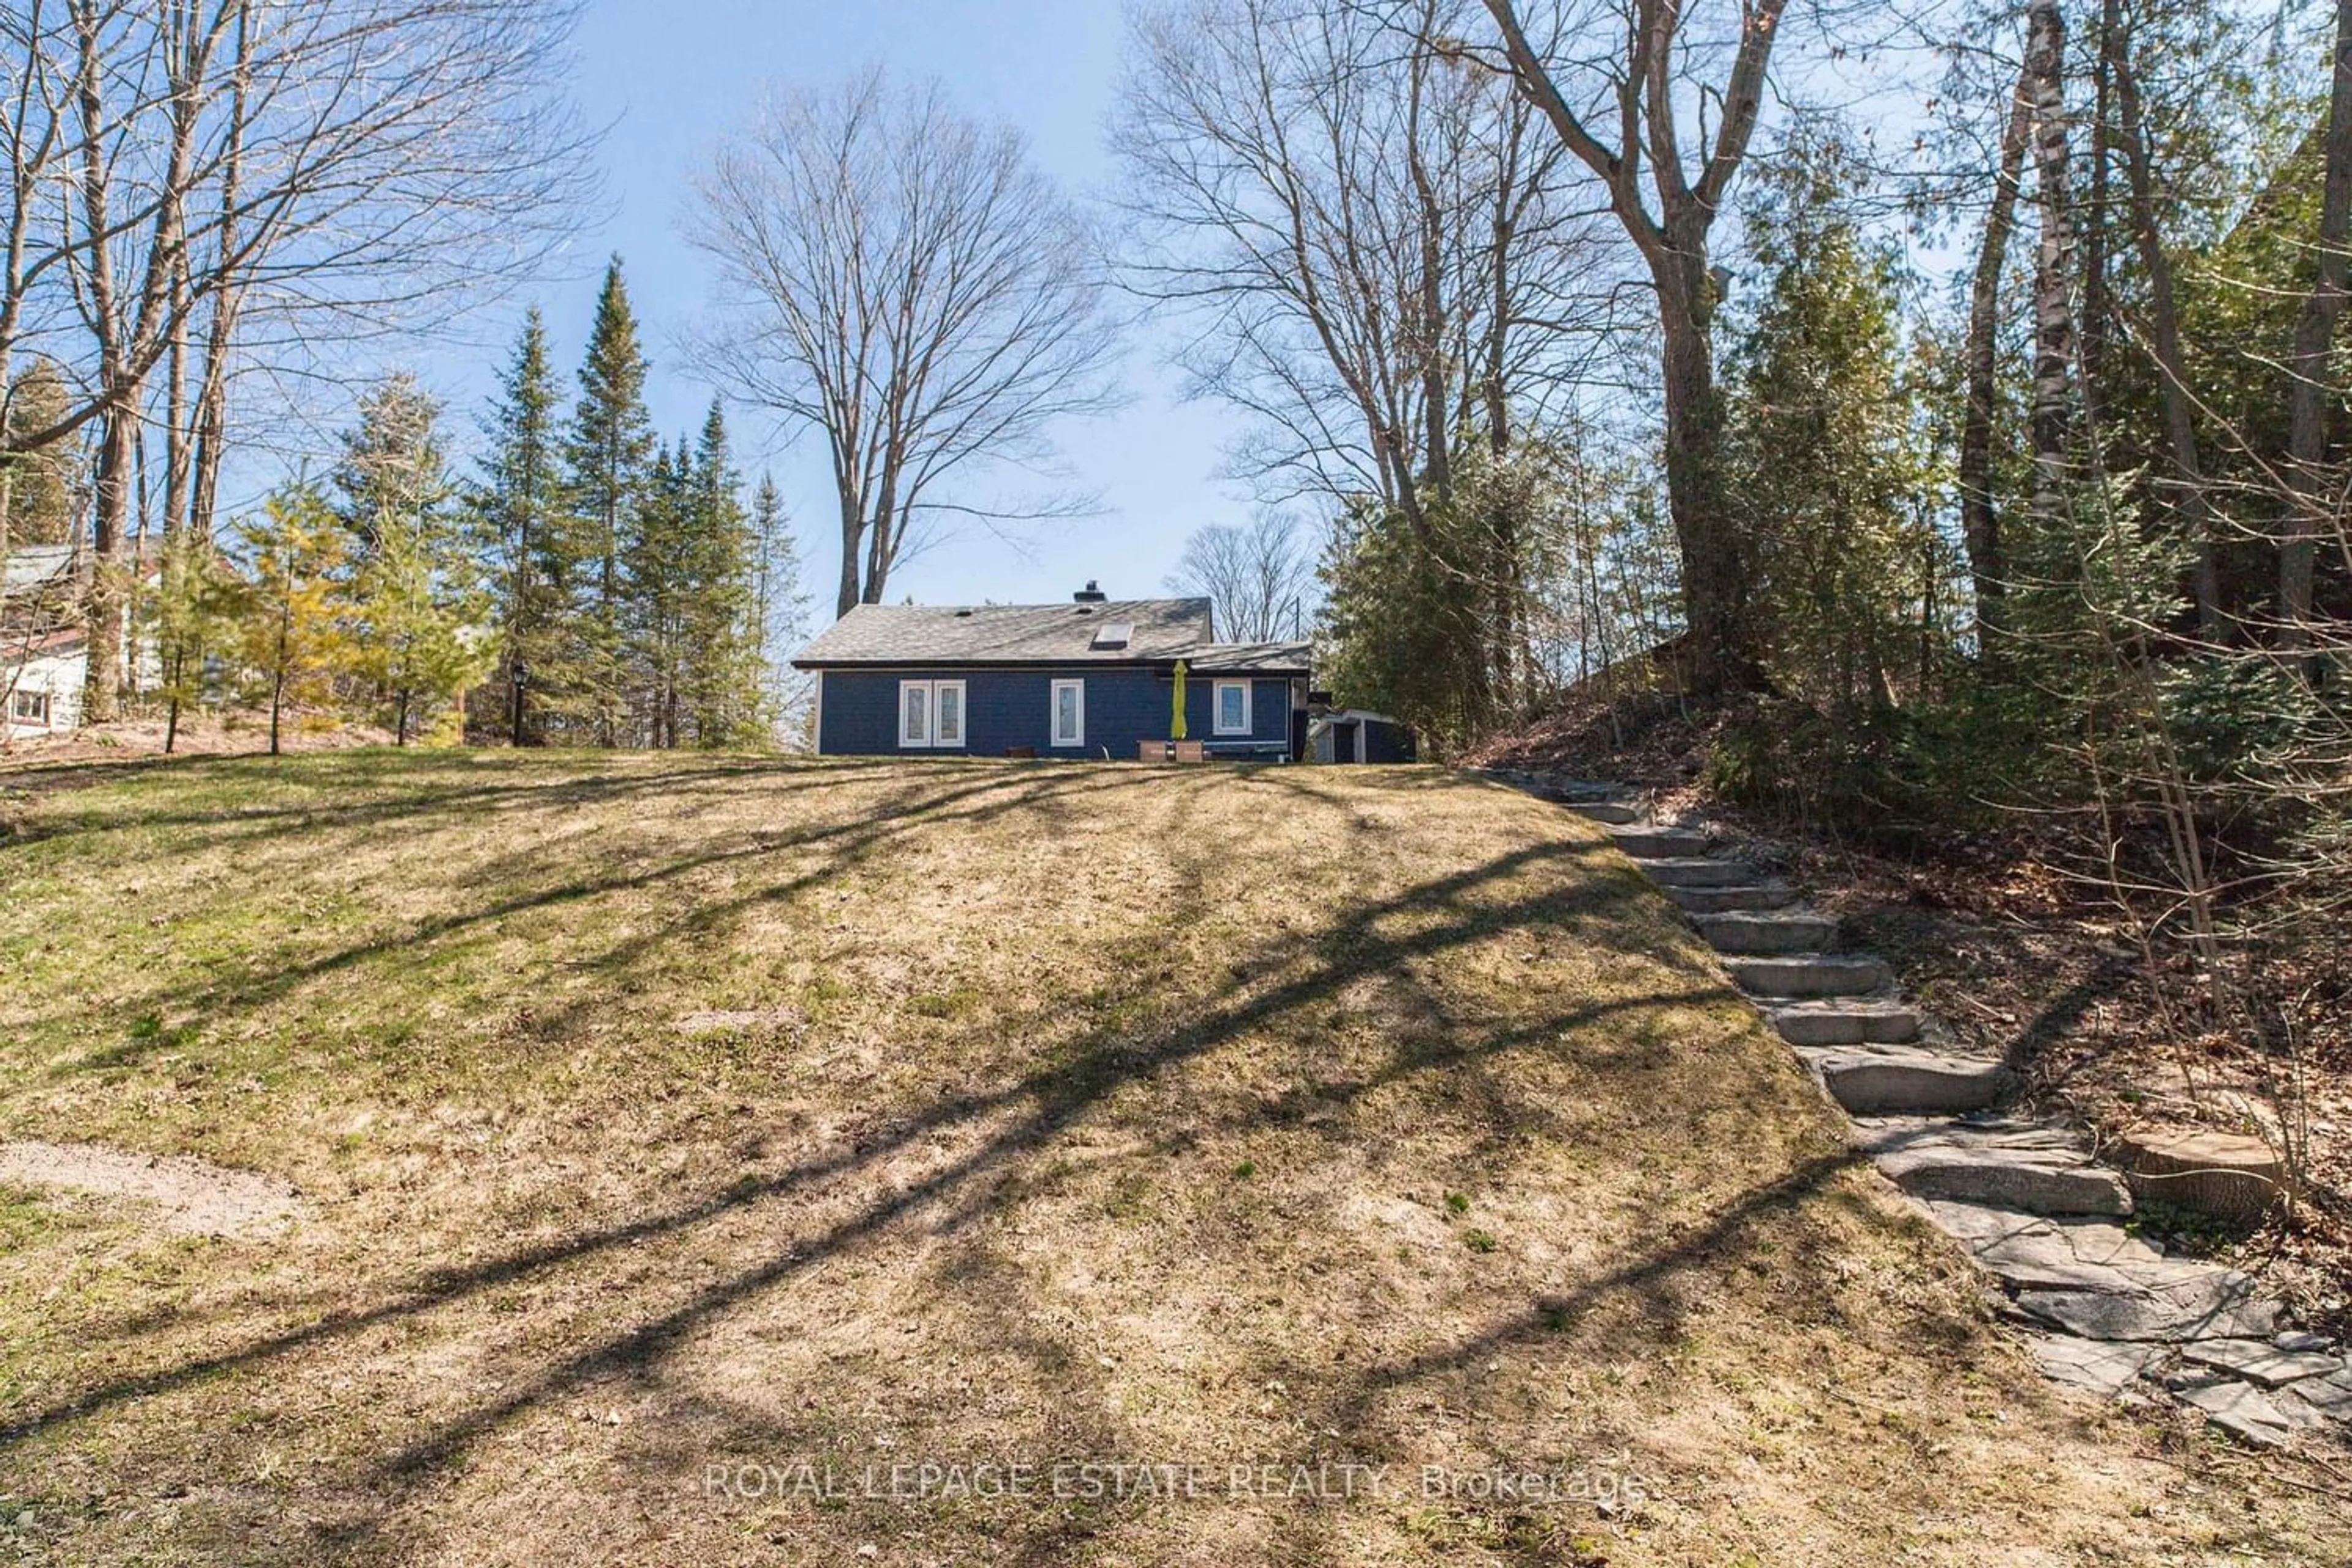 Cottage for 1212 Sauble Falls Rd, South Bruce Peninsula Ontario N0H 2G0